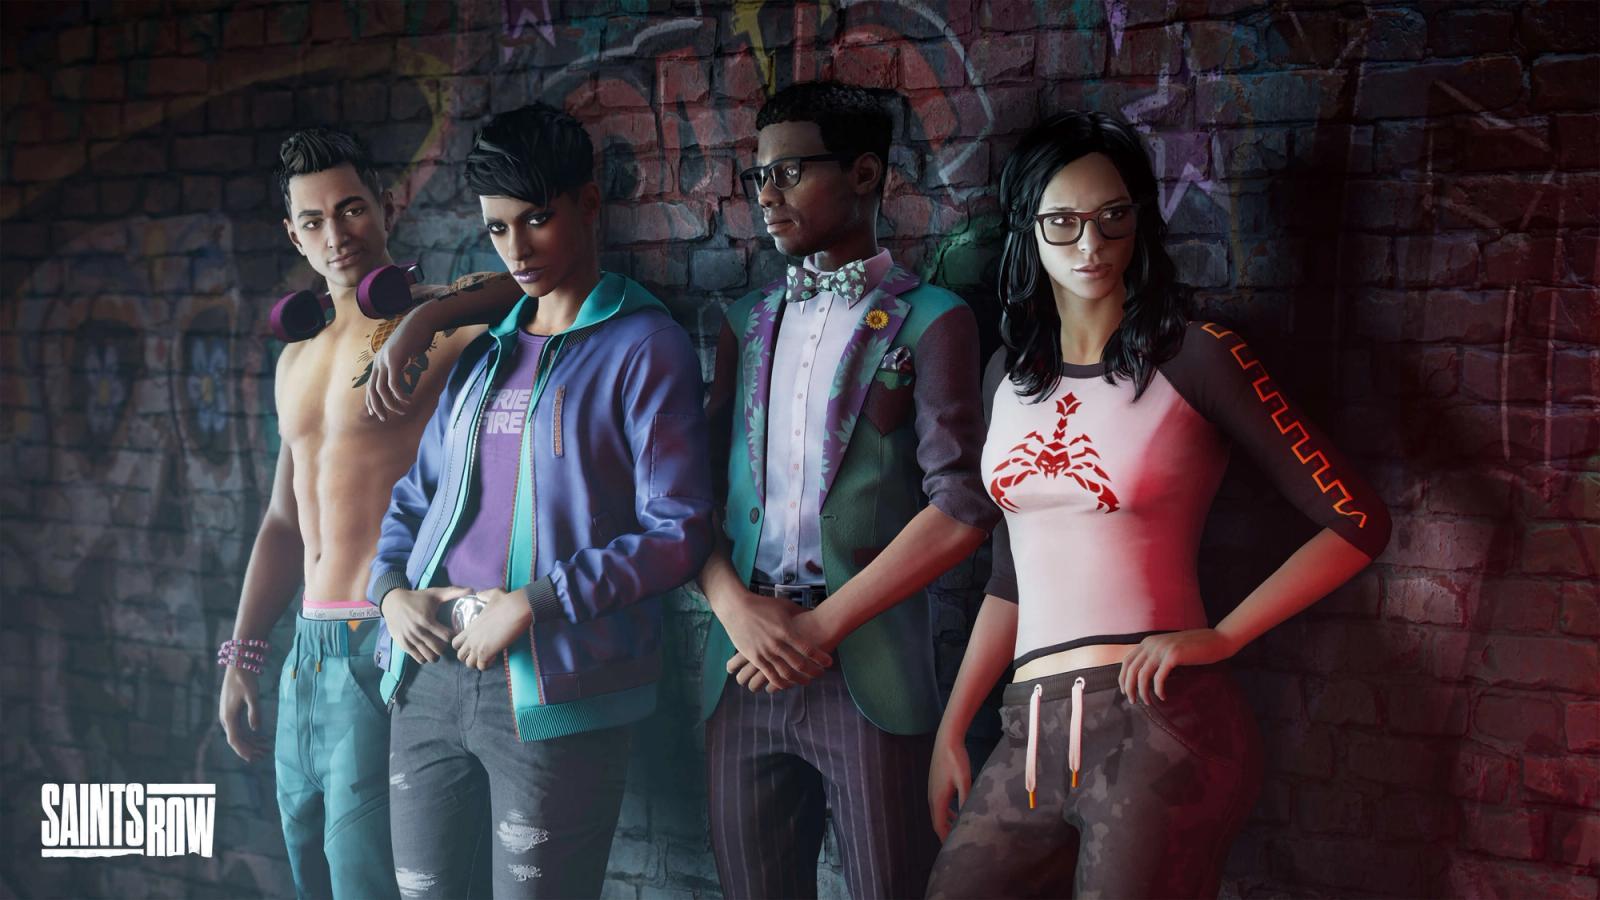 $ people leaning against a graffiti covered wall - Saints Row unable to start game